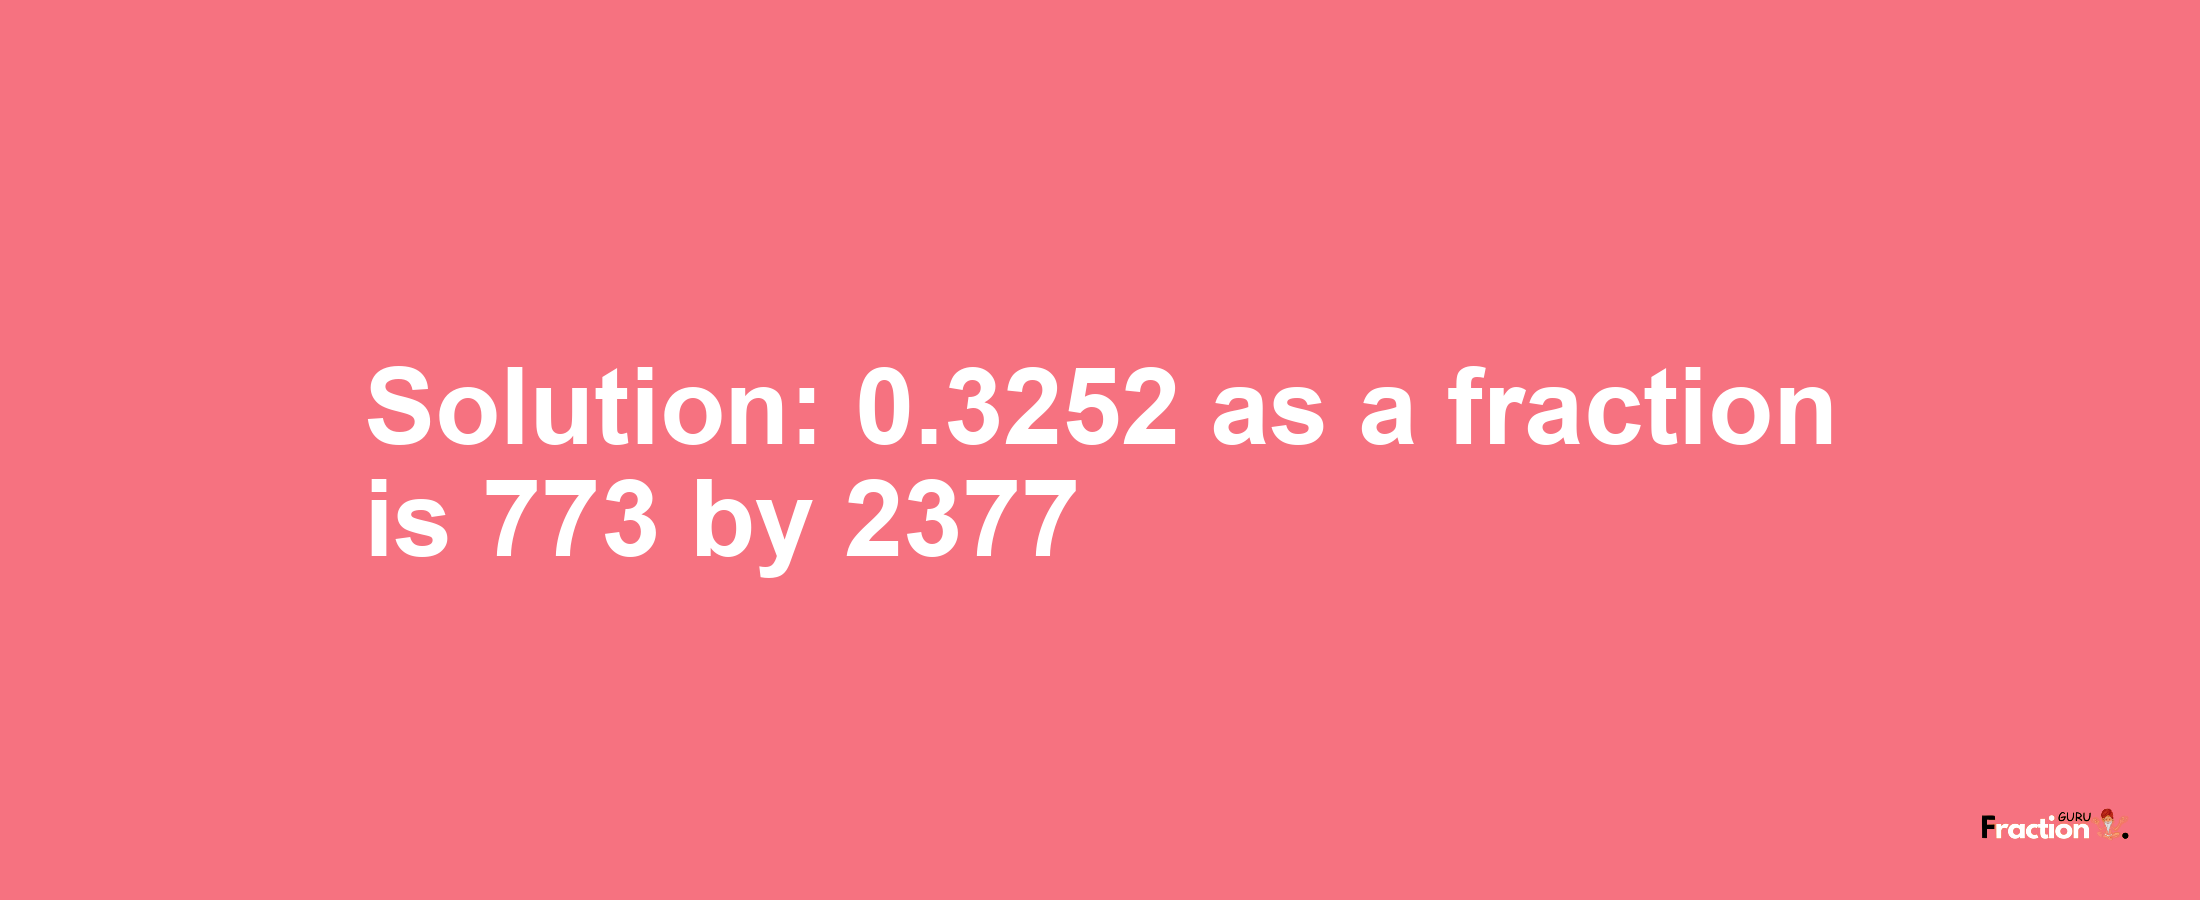 Solution:0.3252 as a fraction is 773/2377